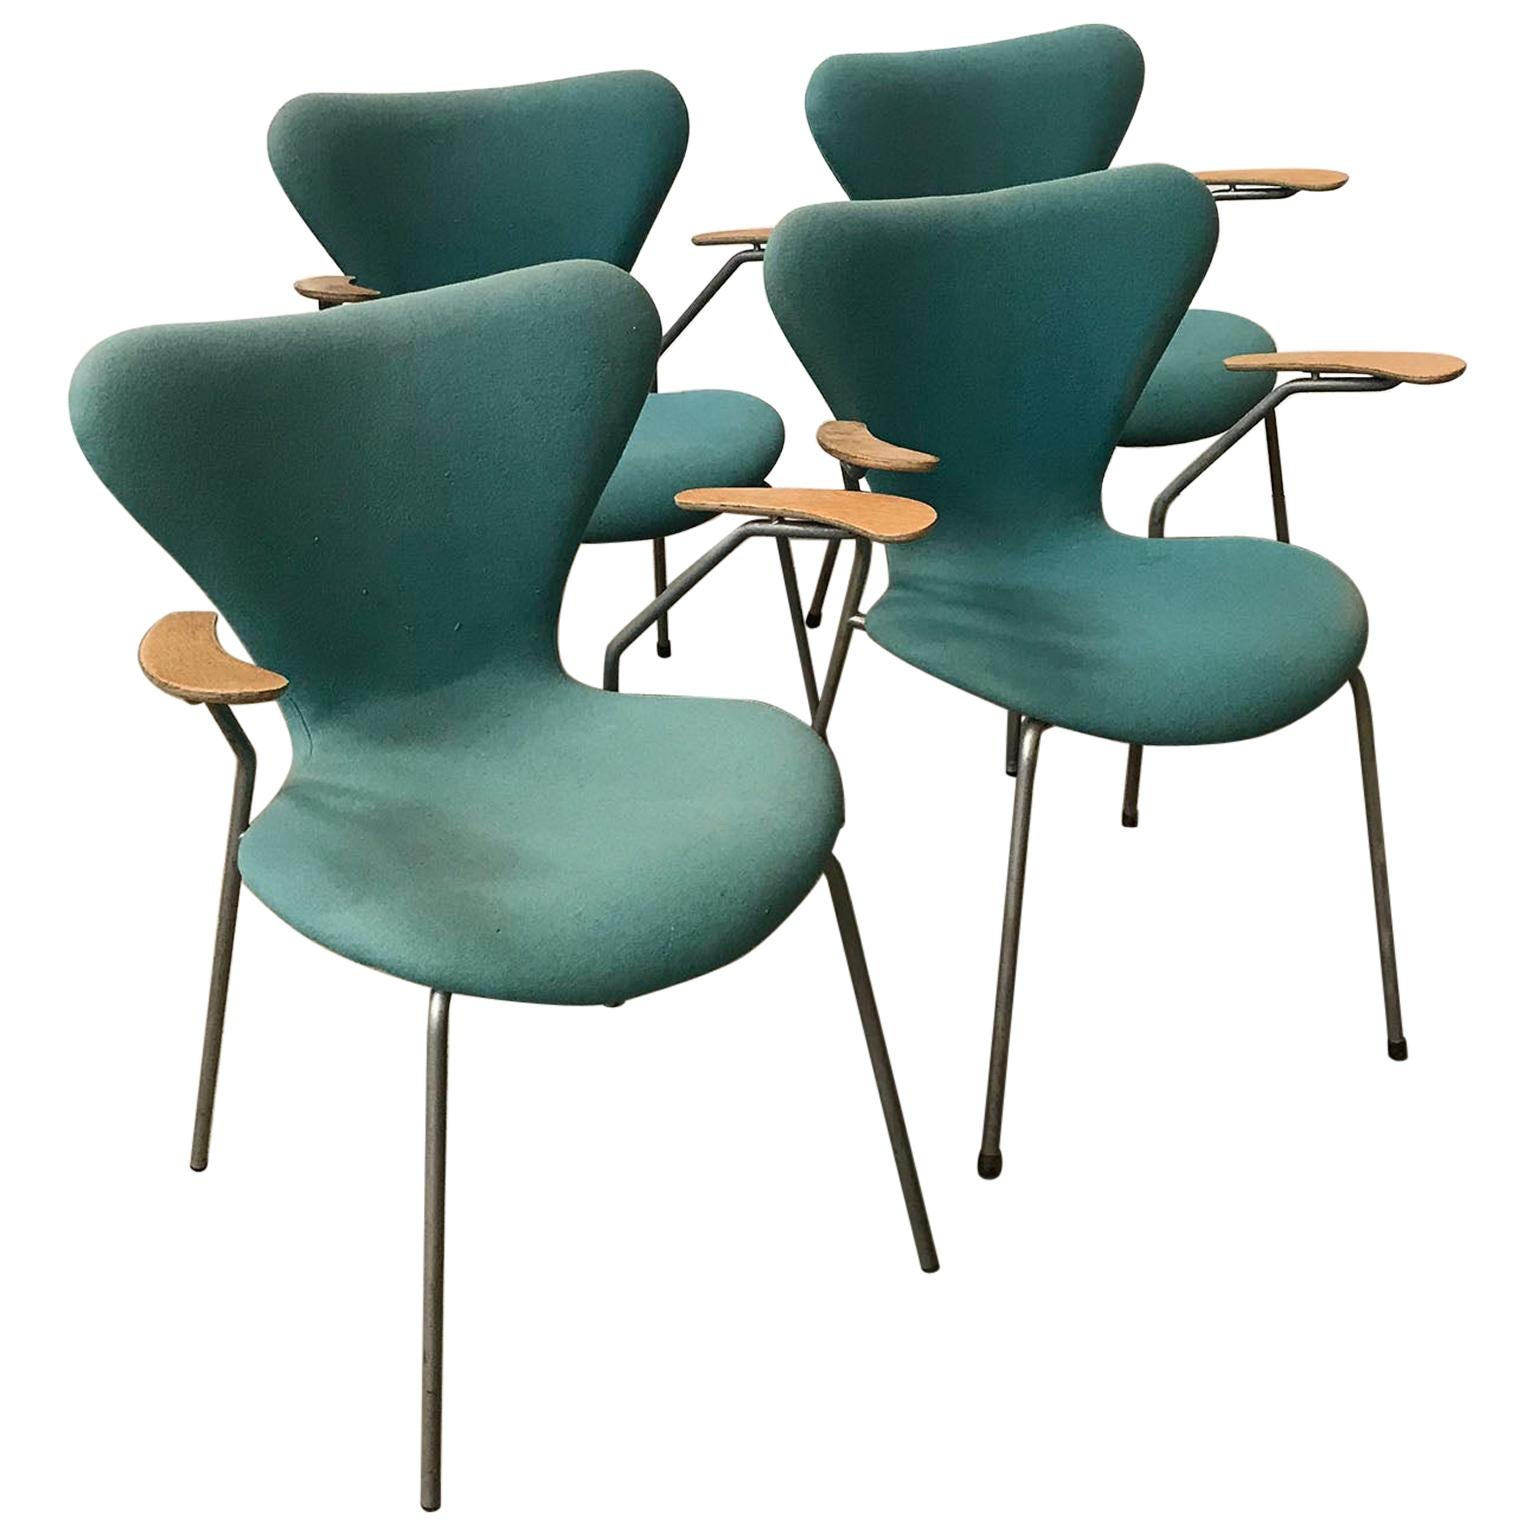 1955, Arne Jacobsen, Set of Four Turquoise Upholstered 3207 Butterfly Armchairs For Sale